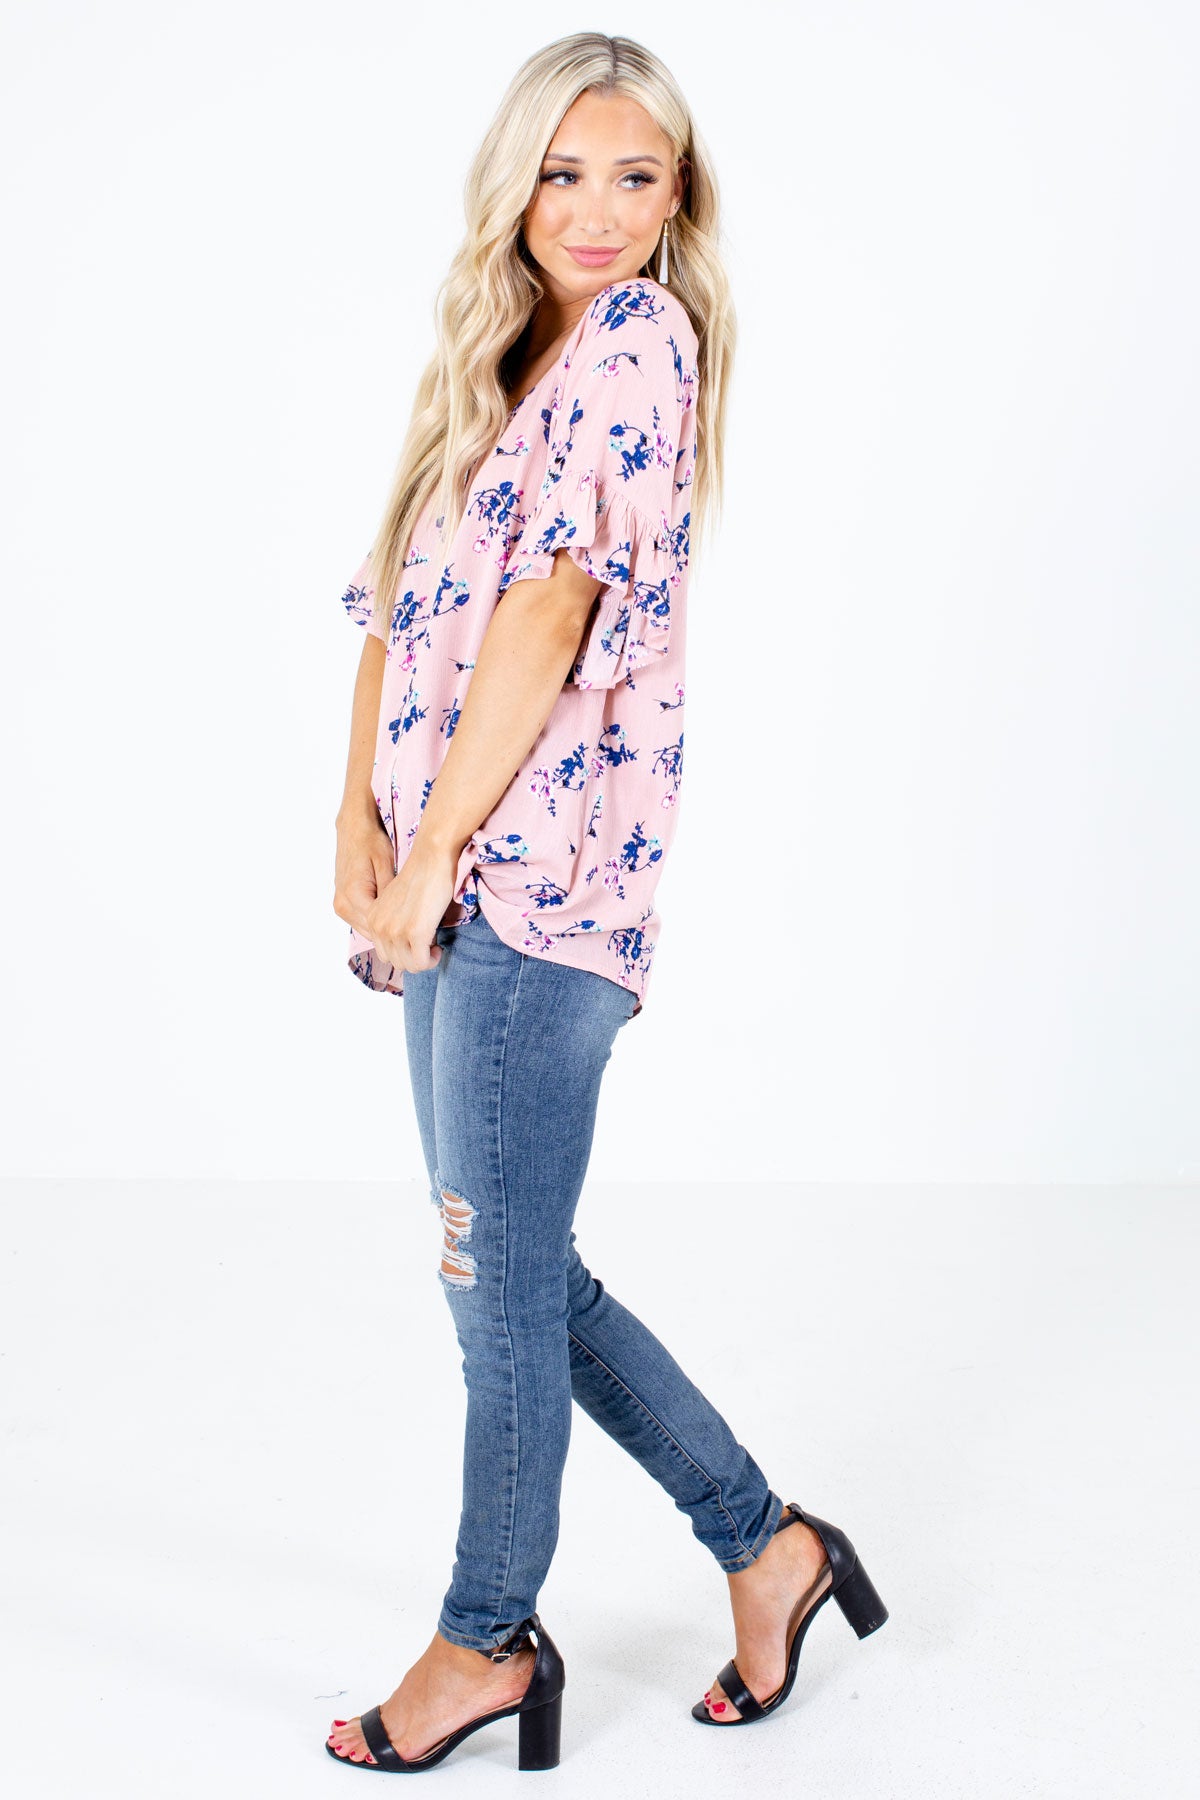 Pink High-Low Hem Boutique Blouses for Women